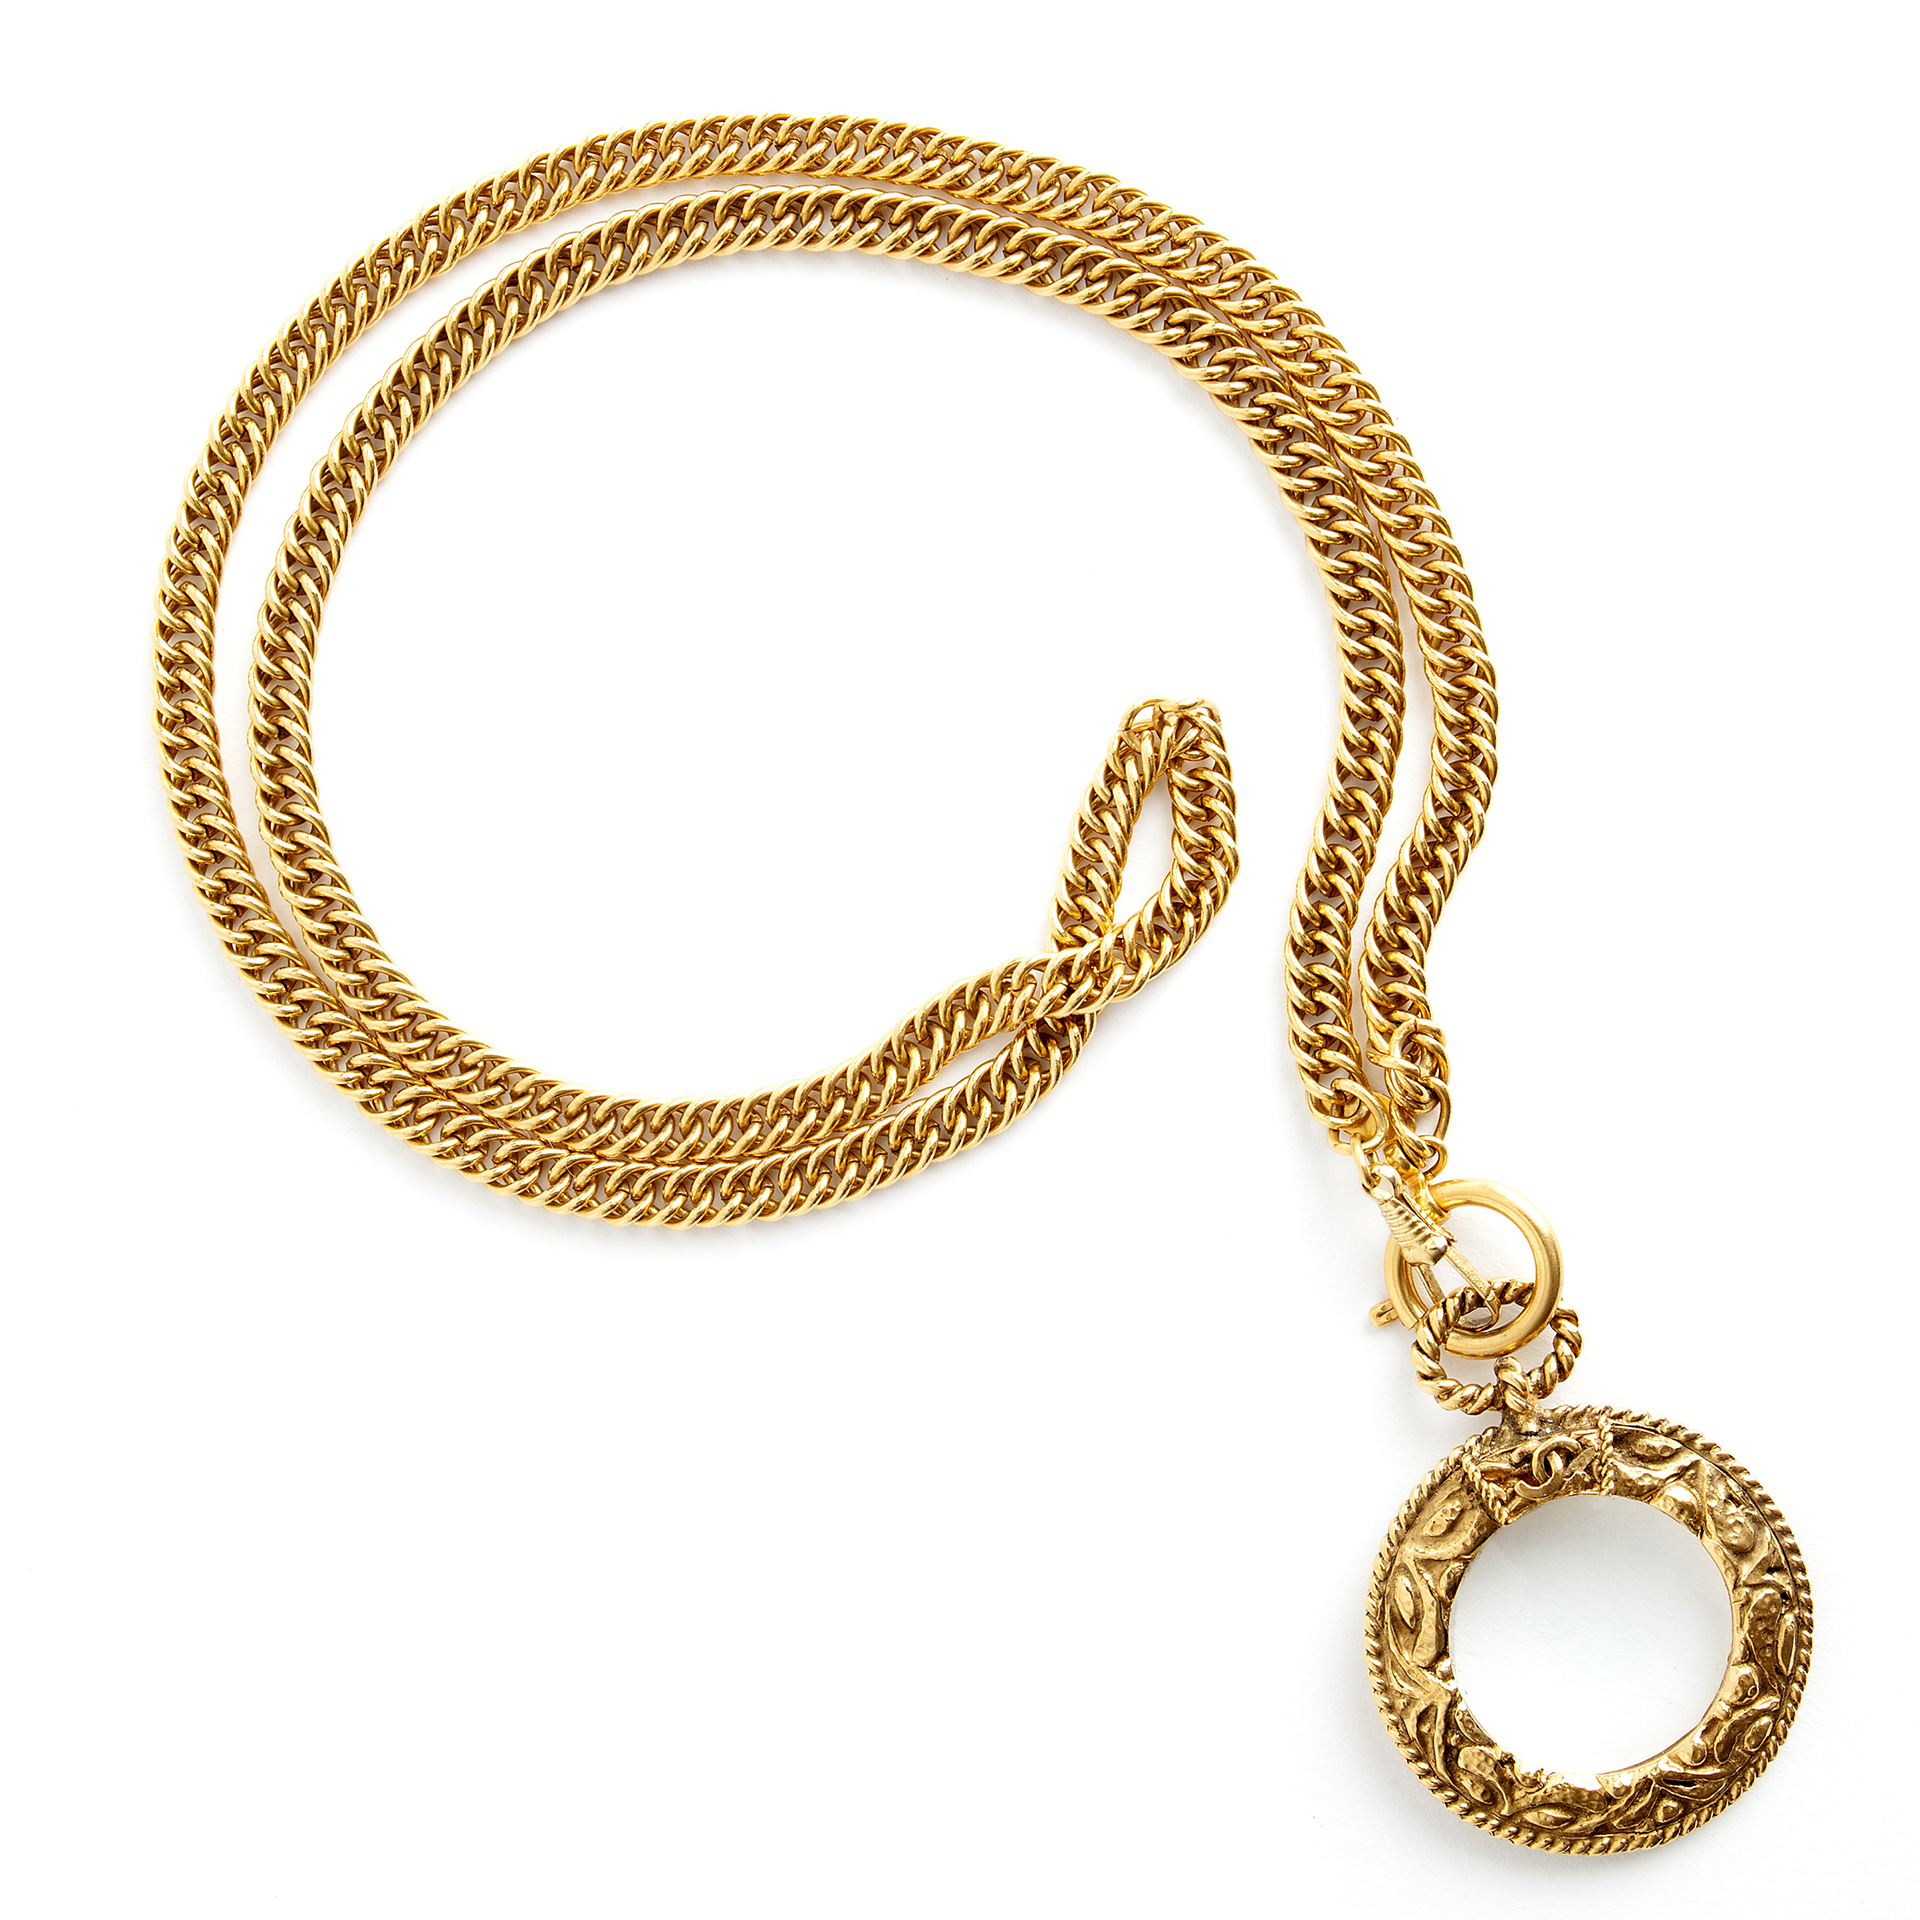 Chanel necklace with magnifying glass pendant - Findage